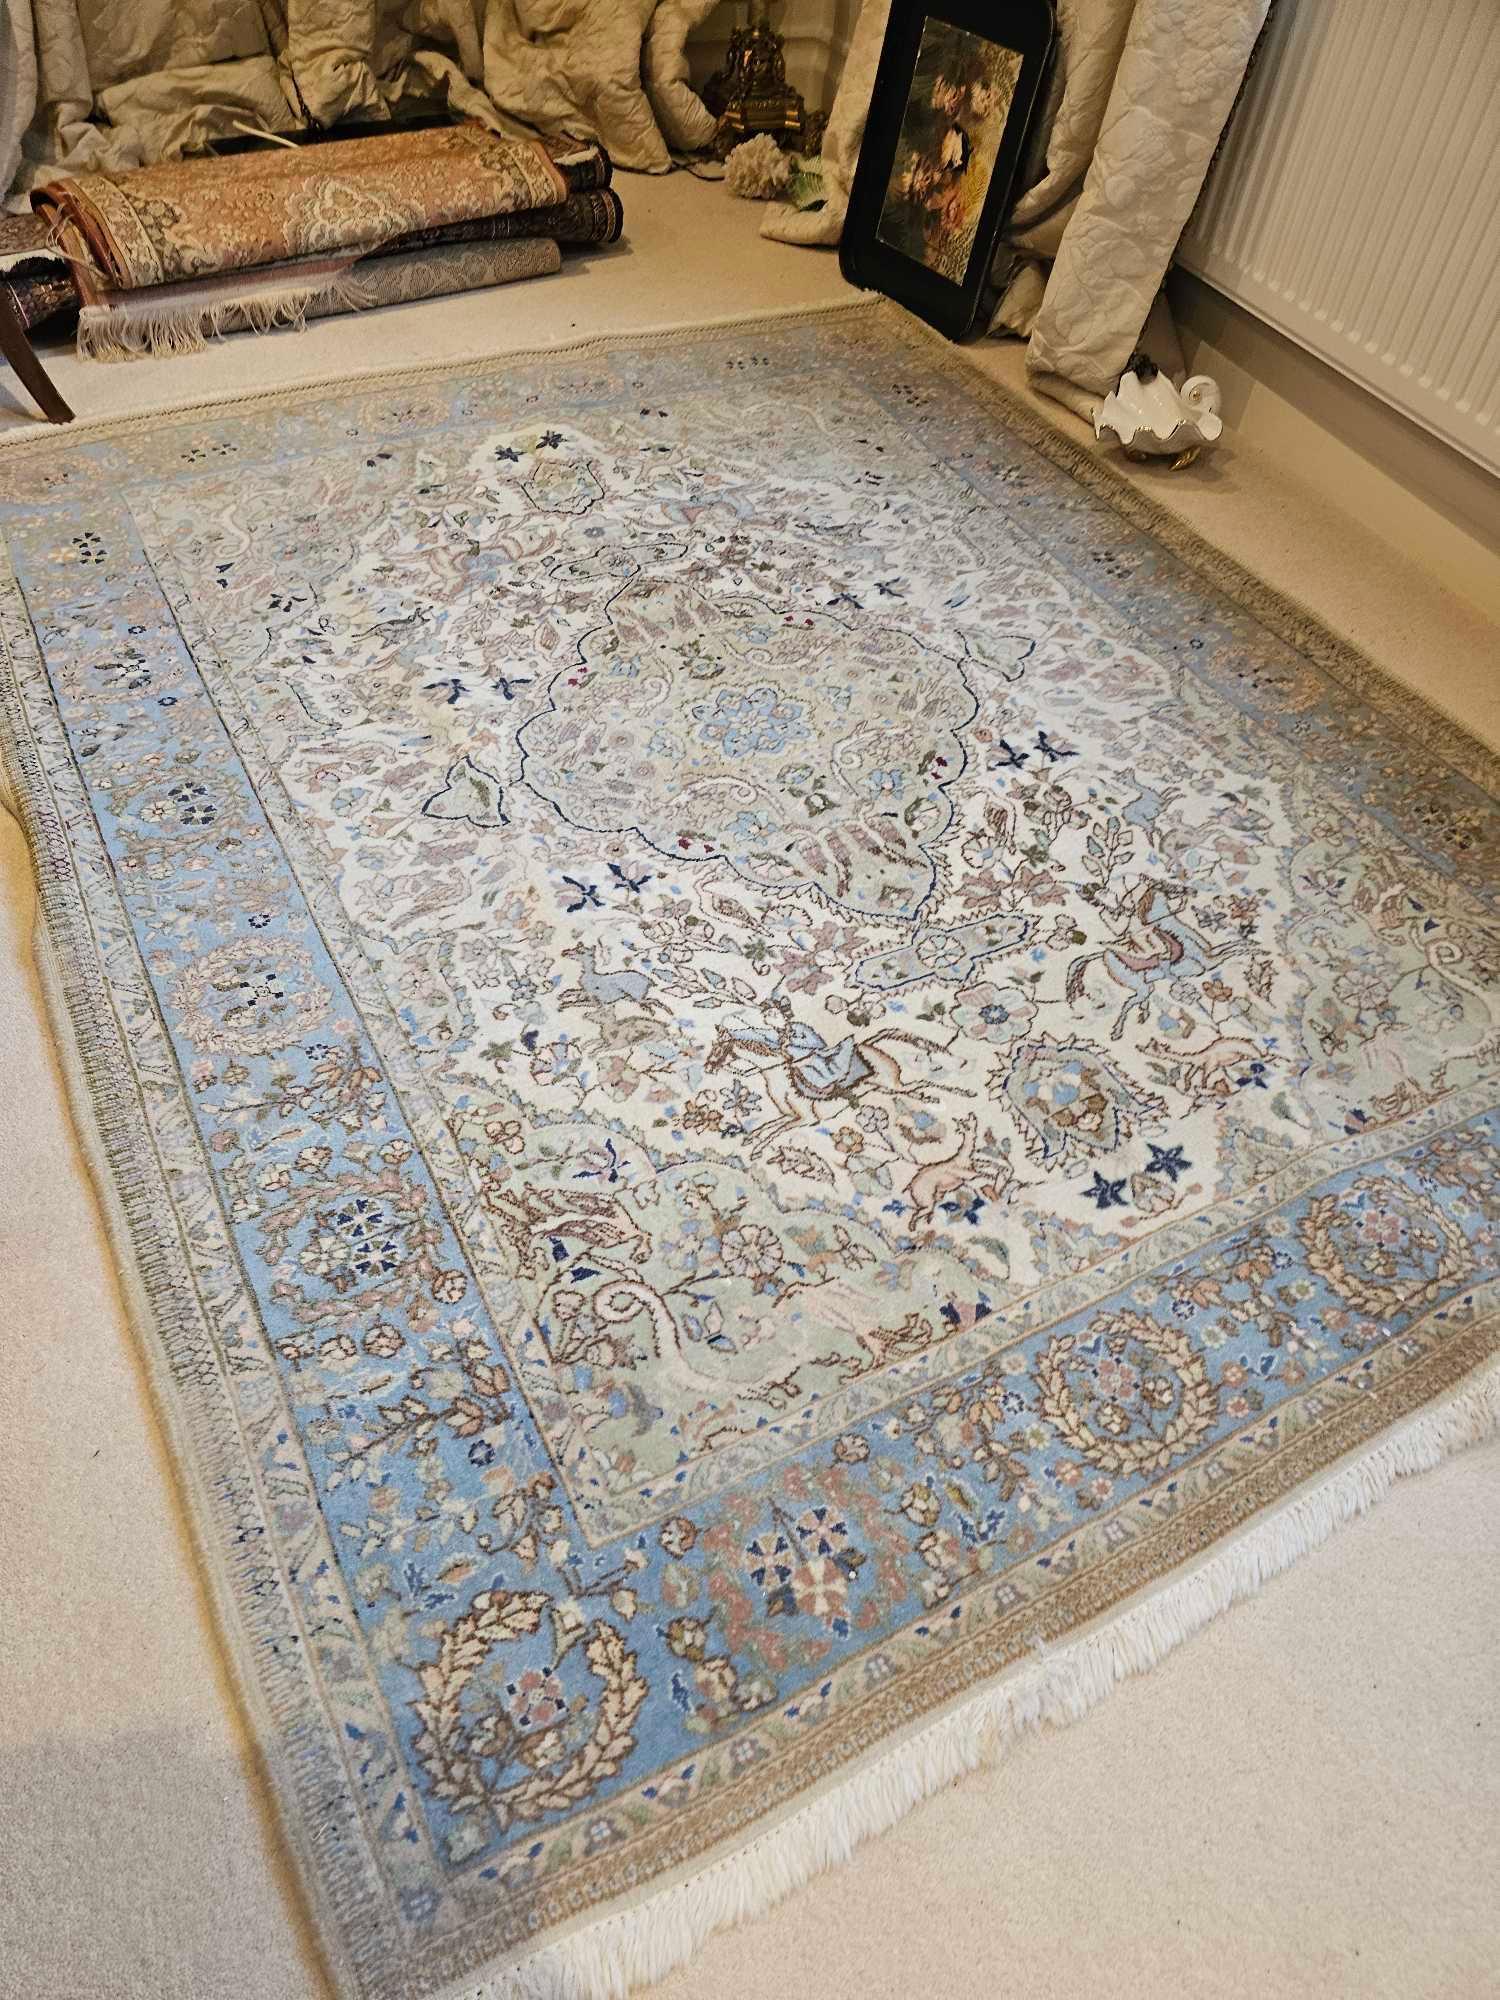 A Persian Patterned Rug The Ivory Field With Lozenge Medallions And Scrolled Spandrels With A - Image 3 of 6